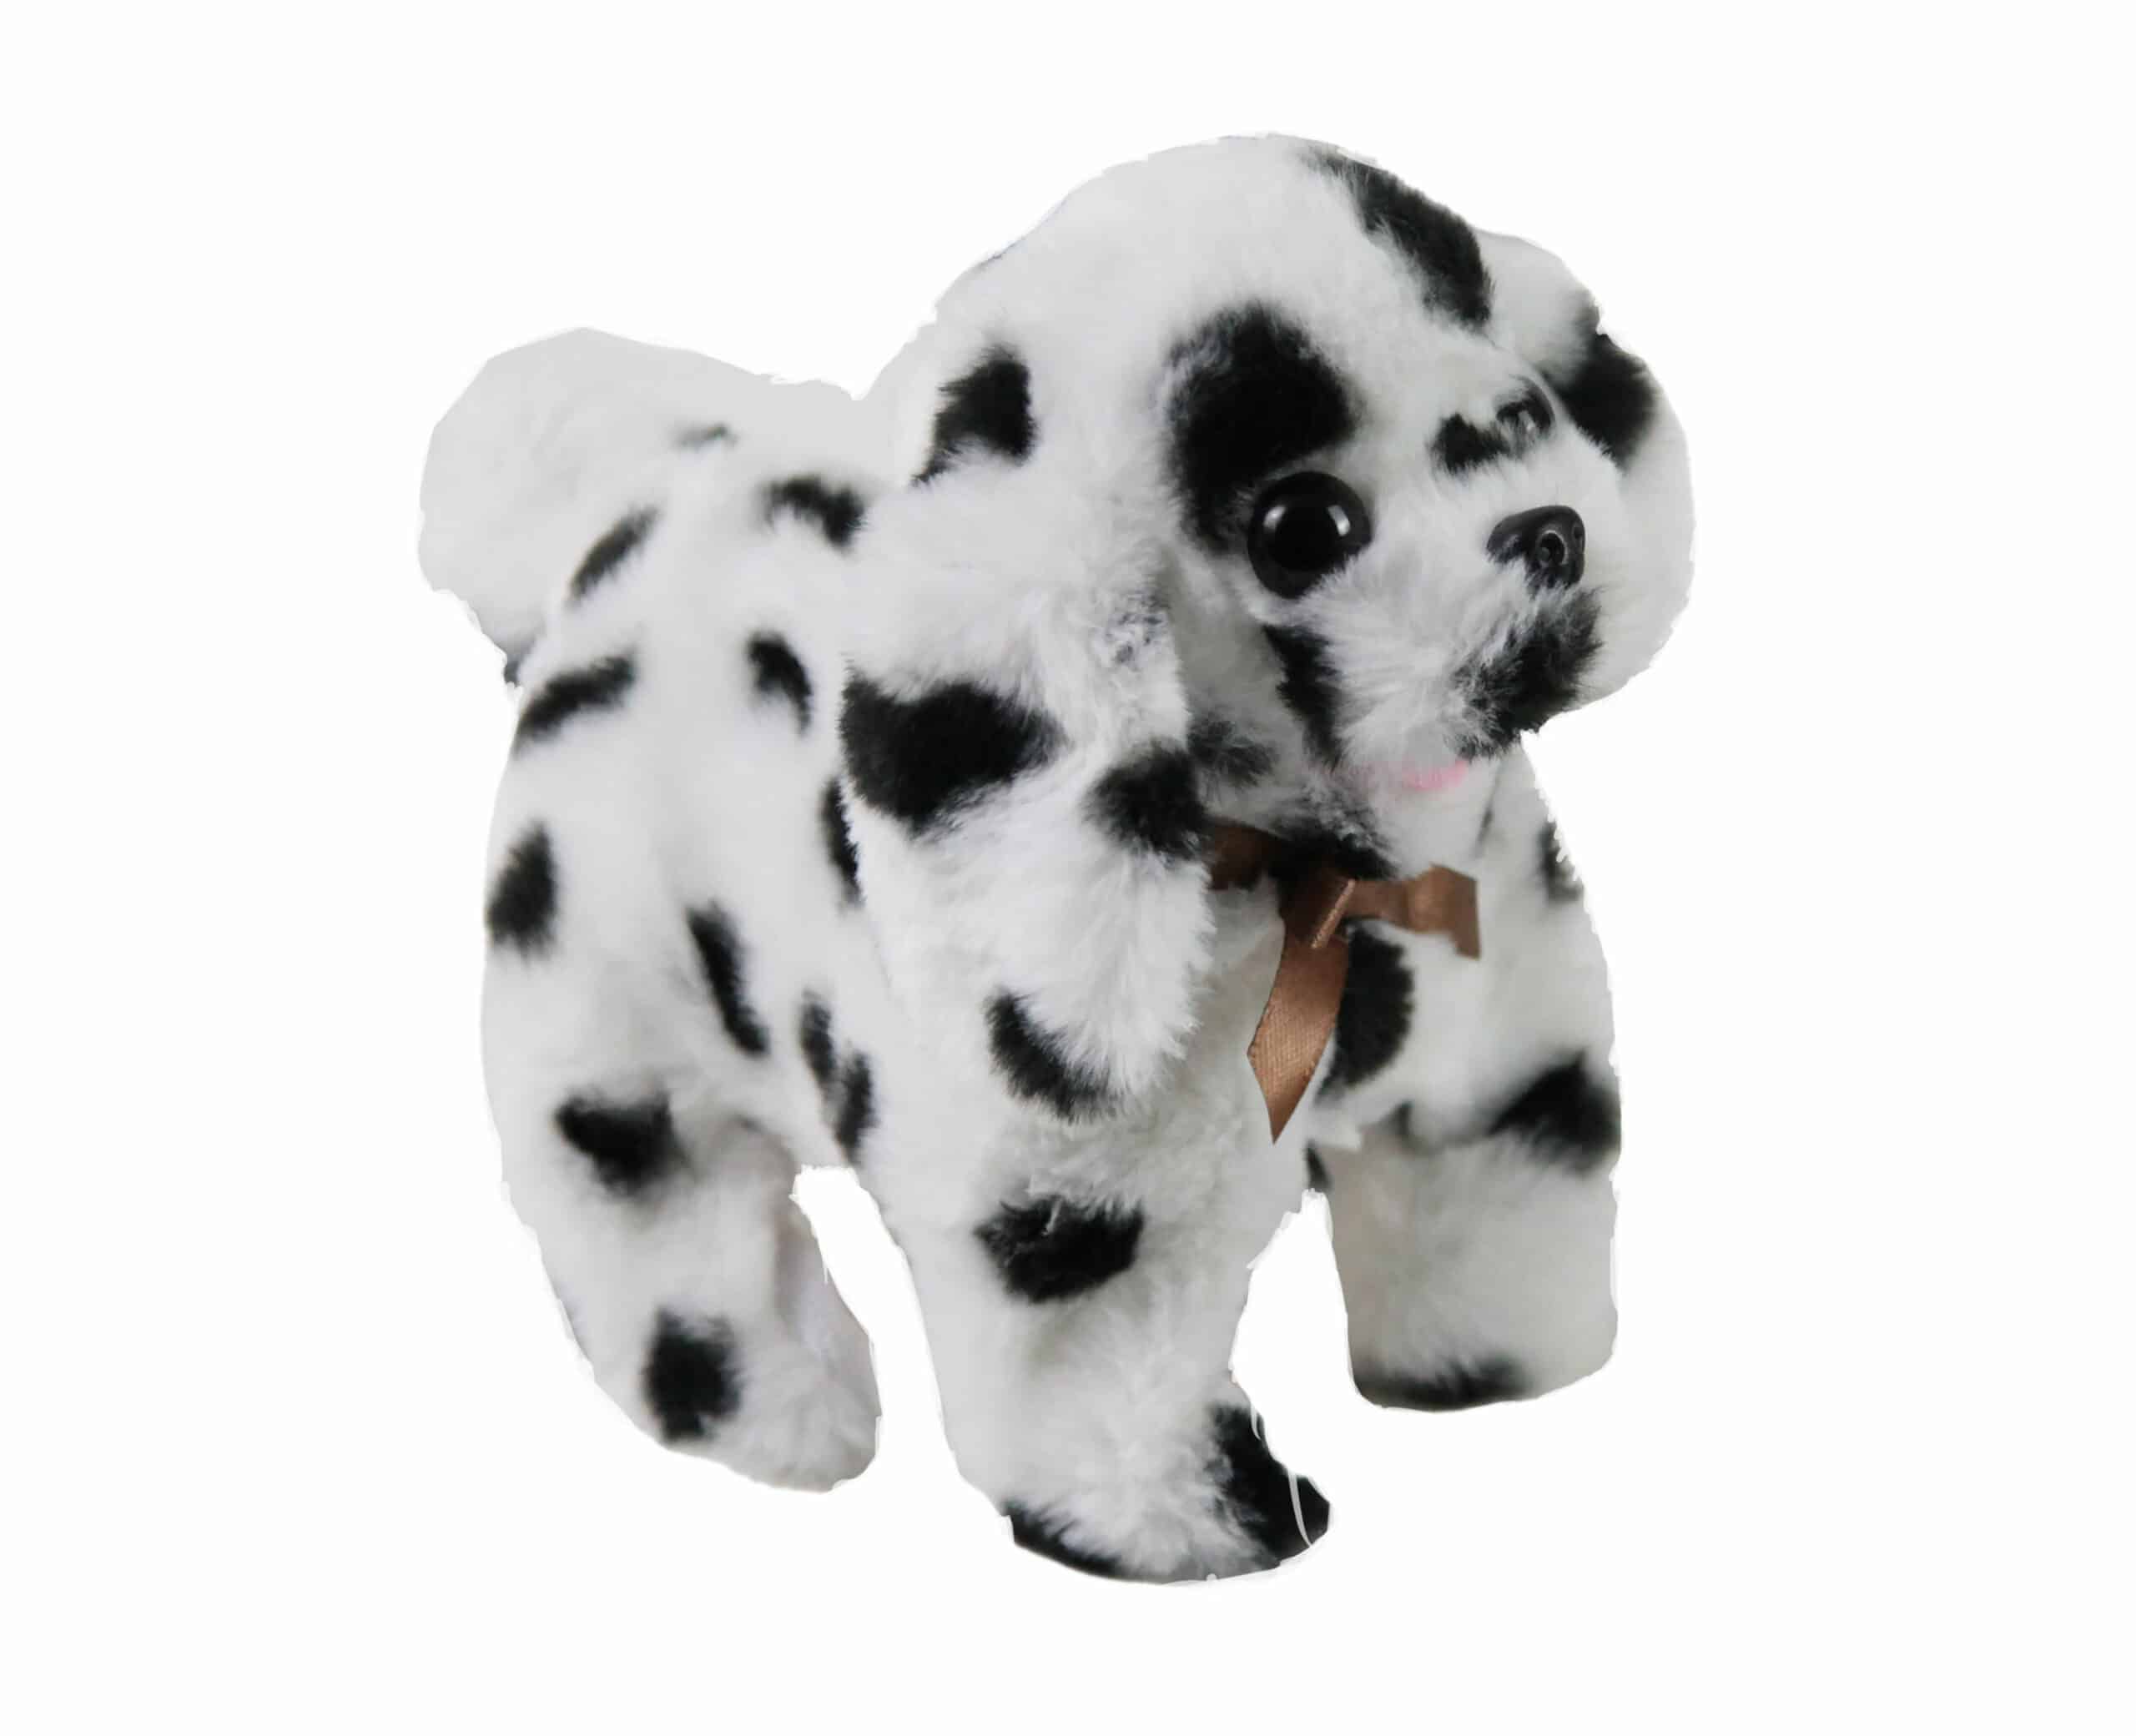 Black and white Dalmatian stuffed animal with brown bow.